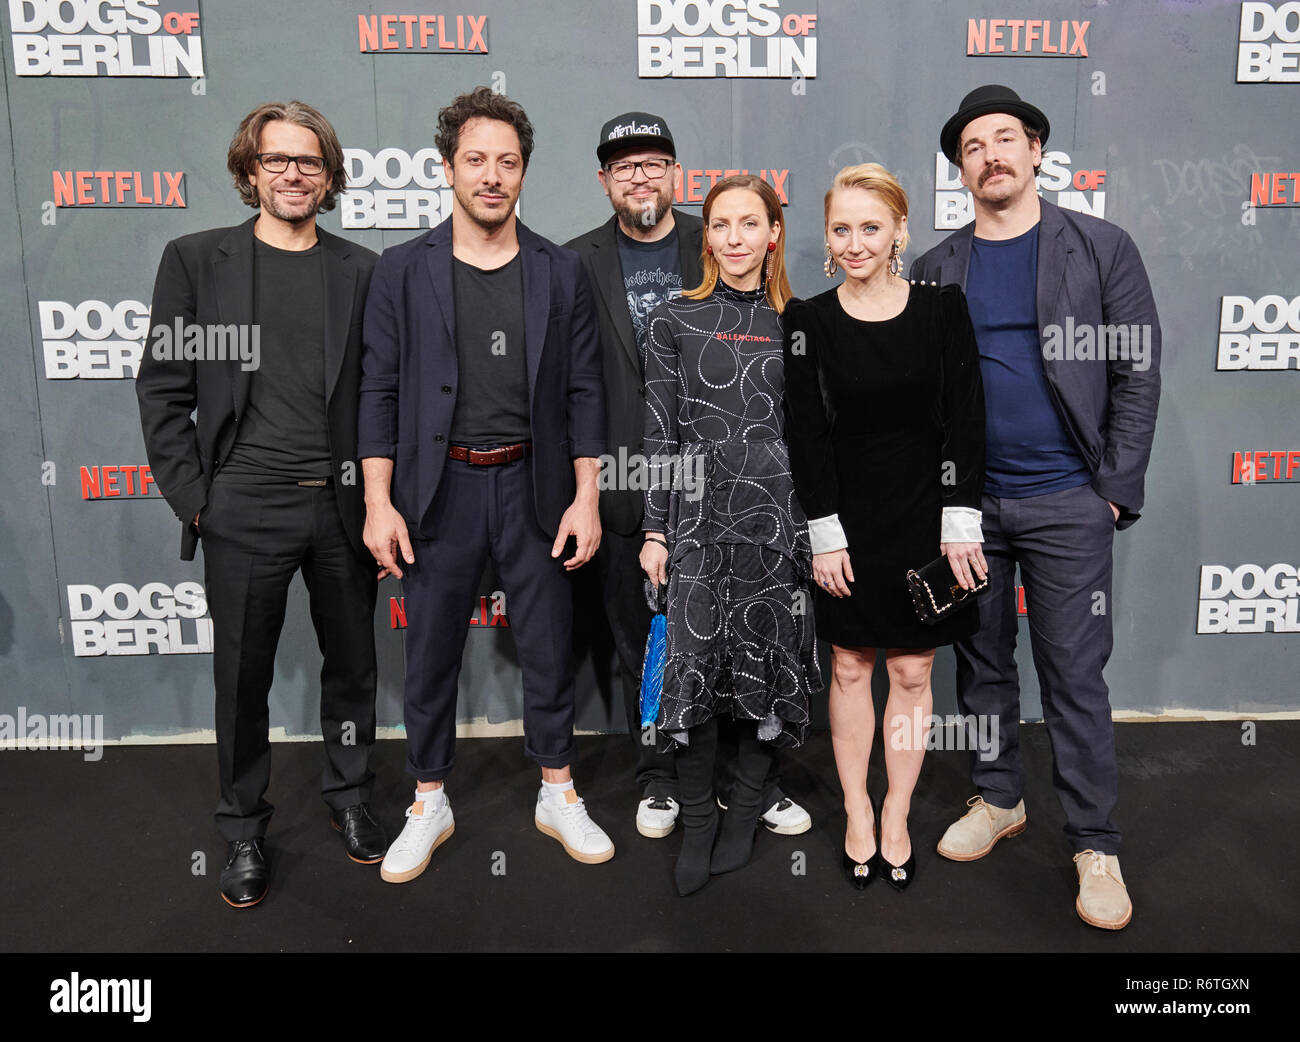 Berlin, Germany. 06th Dec, 2018. Siegfried Kamml (l-r), Showrunner, Fahri Yardim, actor, Christian Alvart, Showrunner, Katharina Schüttler, actress, Anna Maria Mühe, actress, and Felix Kramer, actor, come to the film premiere of the Netflix series 'Dogs of Berlin' at the Kino International. The four actors are leading actors under the direction of Kamml and Alvart. Credit: Annette Riedl/dpa/Alamy Live News Stock Photo